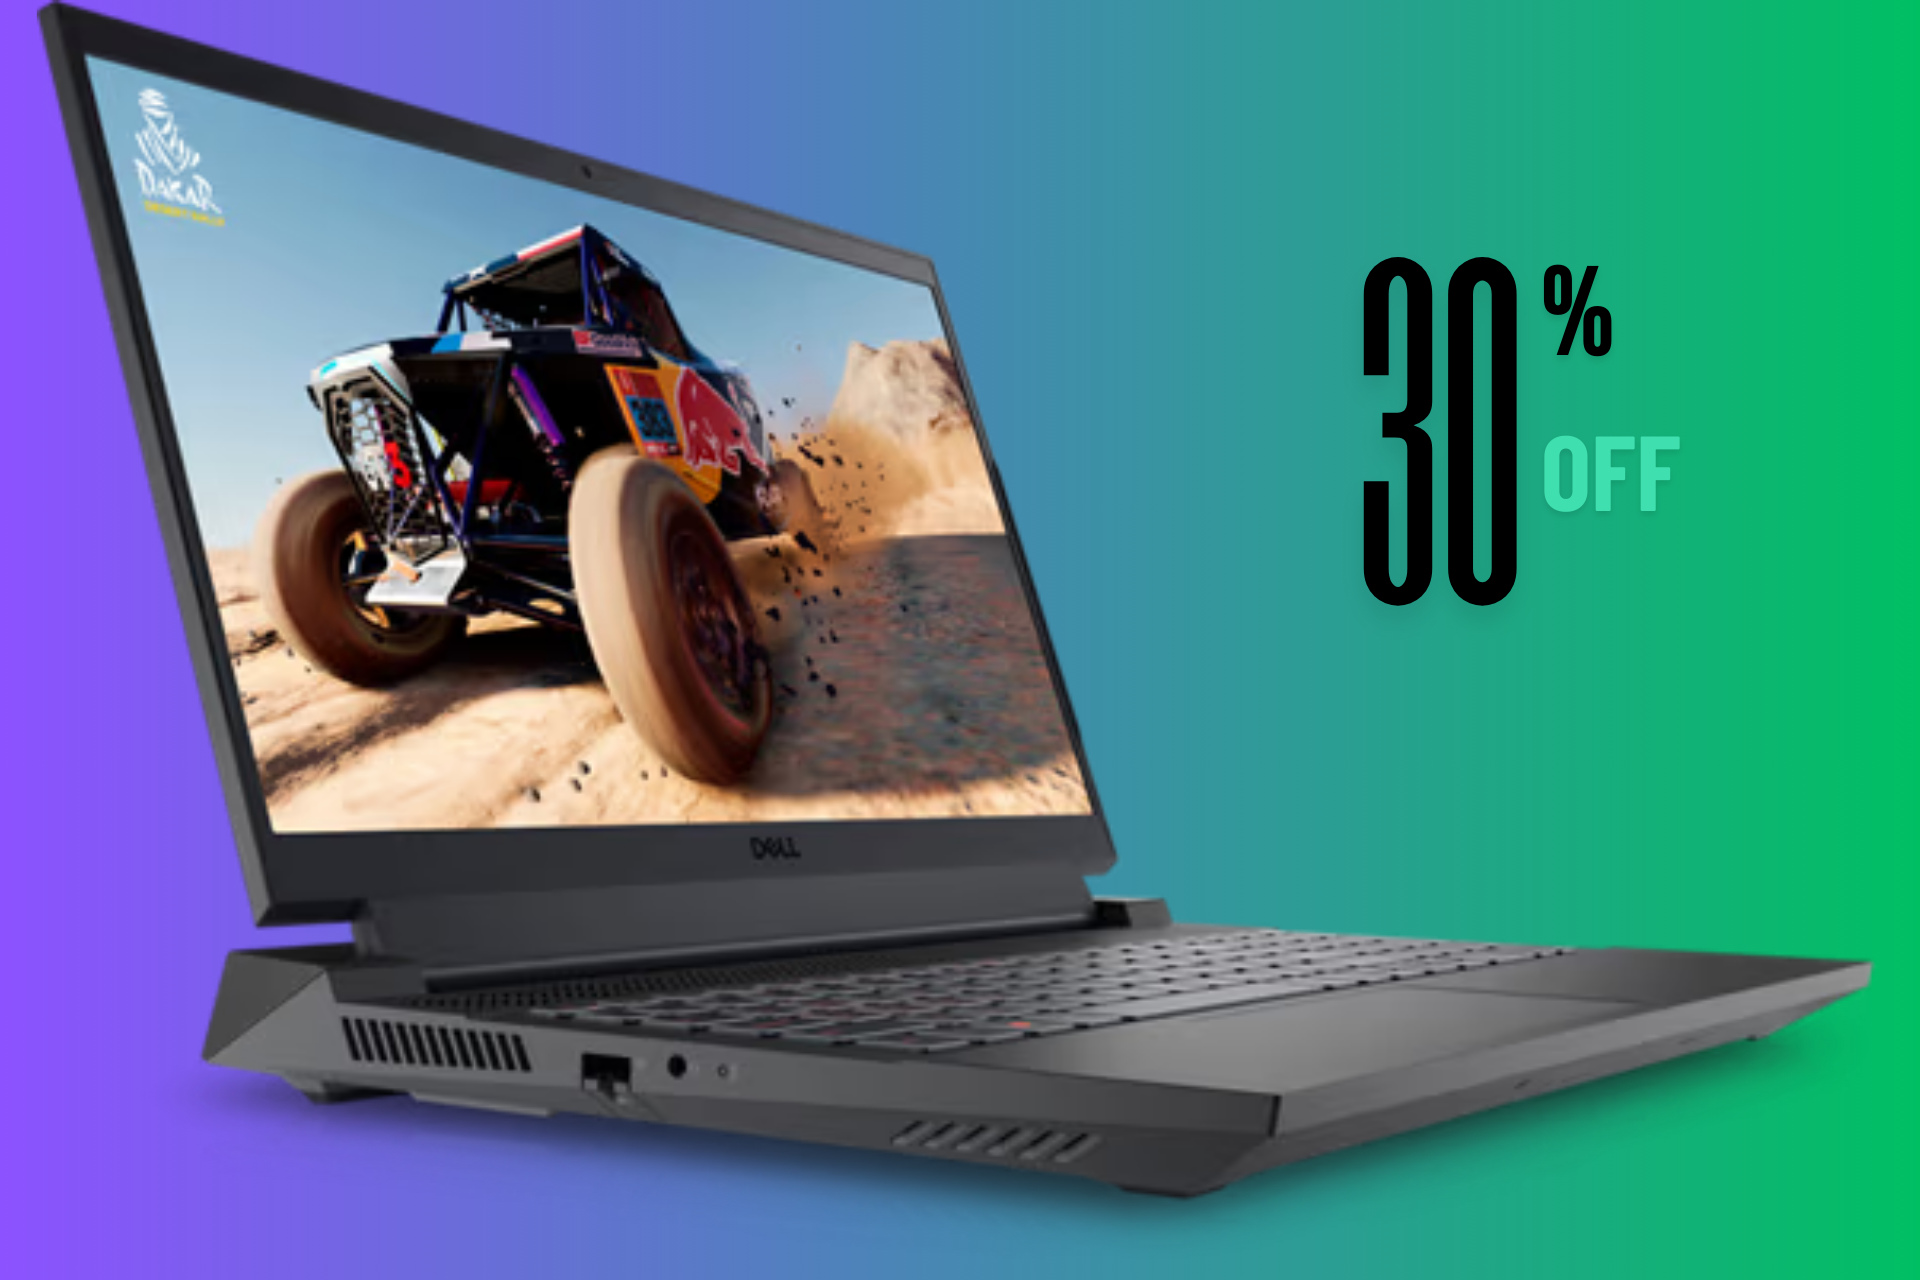 Dell G15 gaming laptop is 30% off